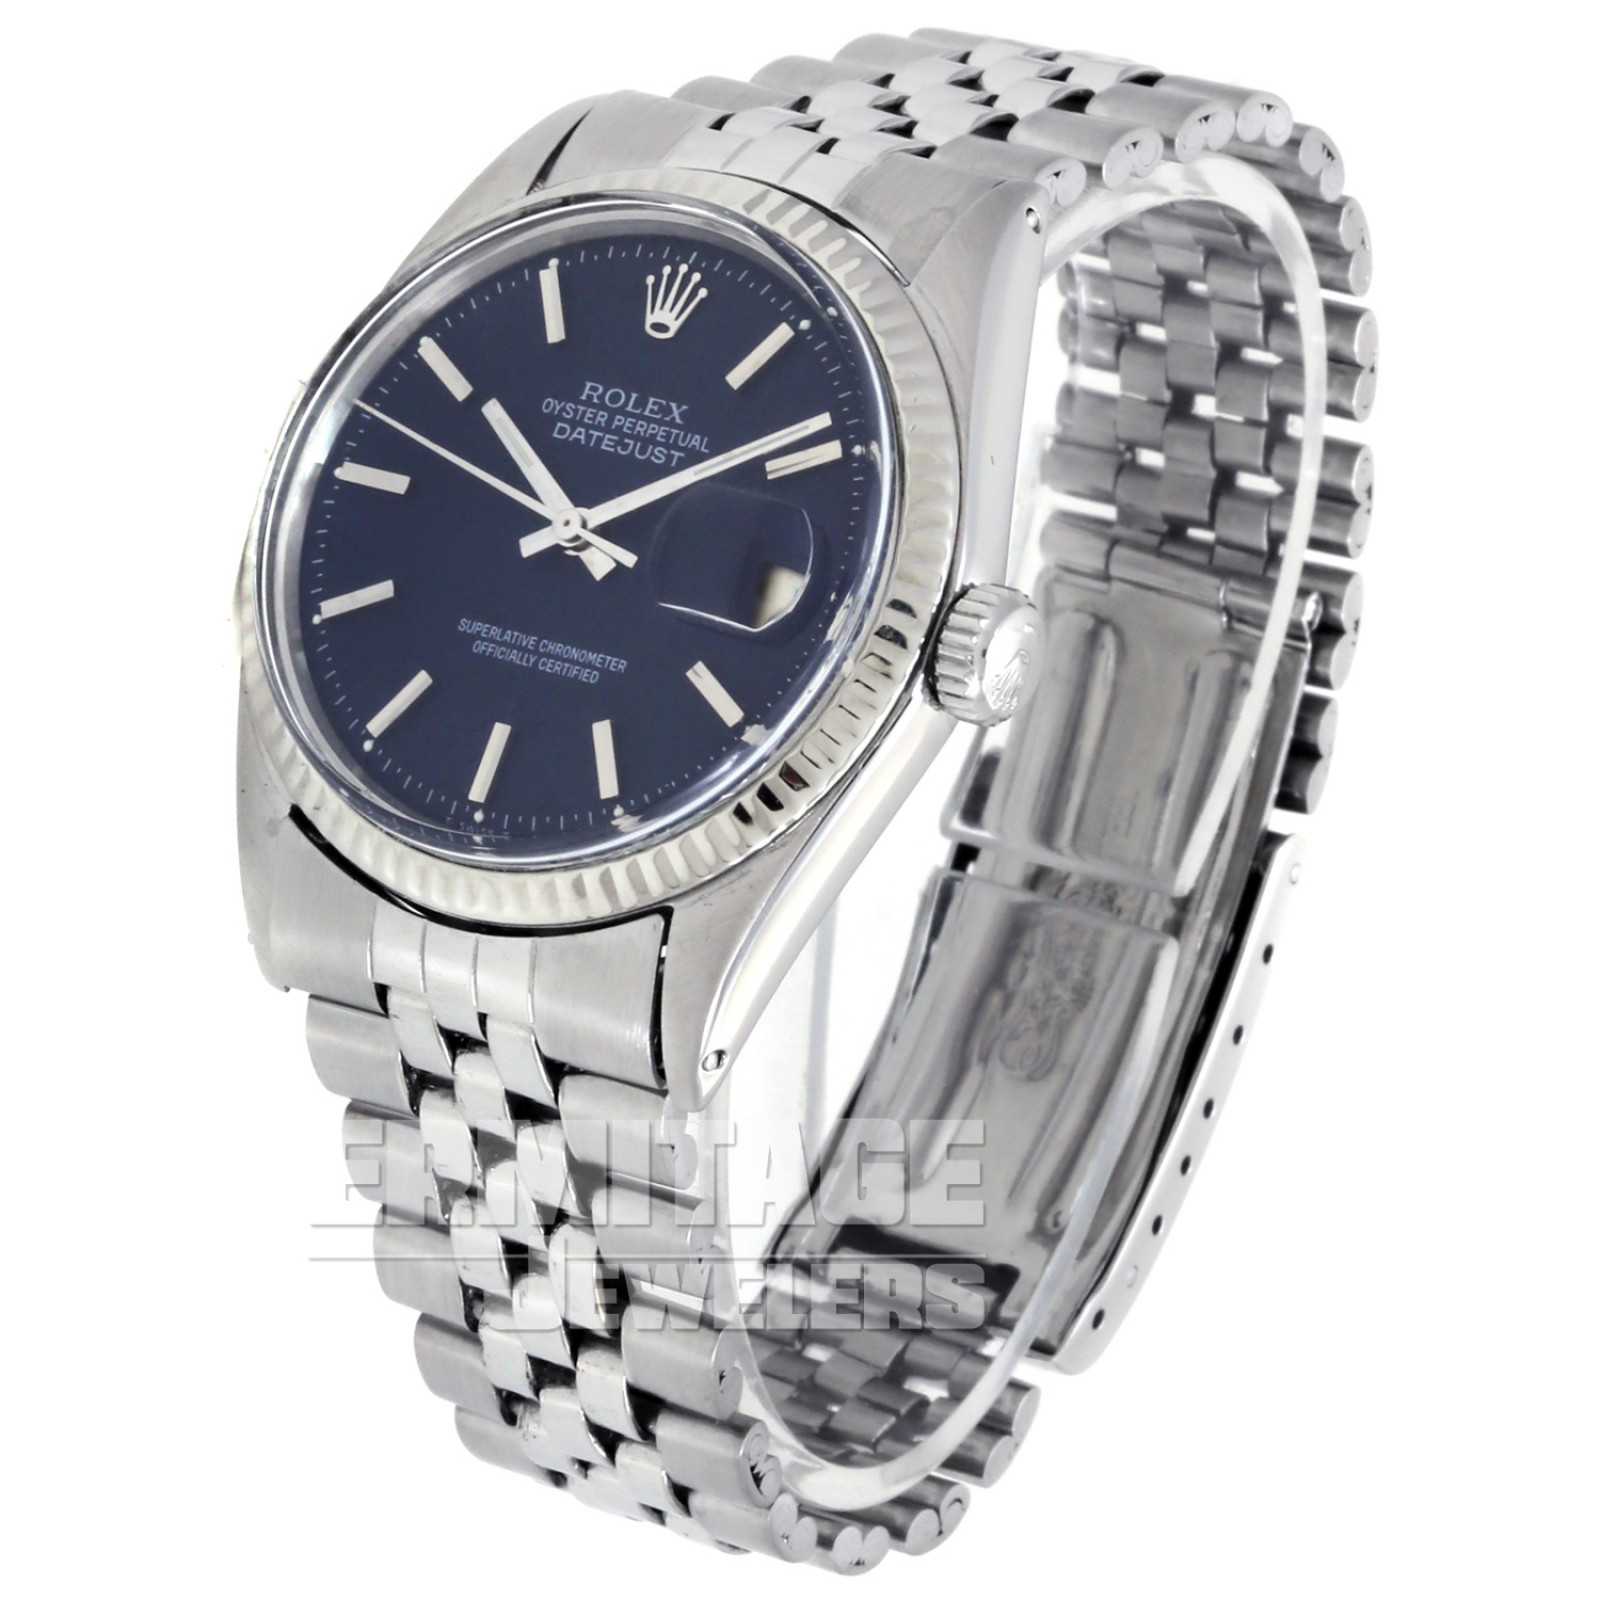 Rolex Datejust 1601 with Blue Dial